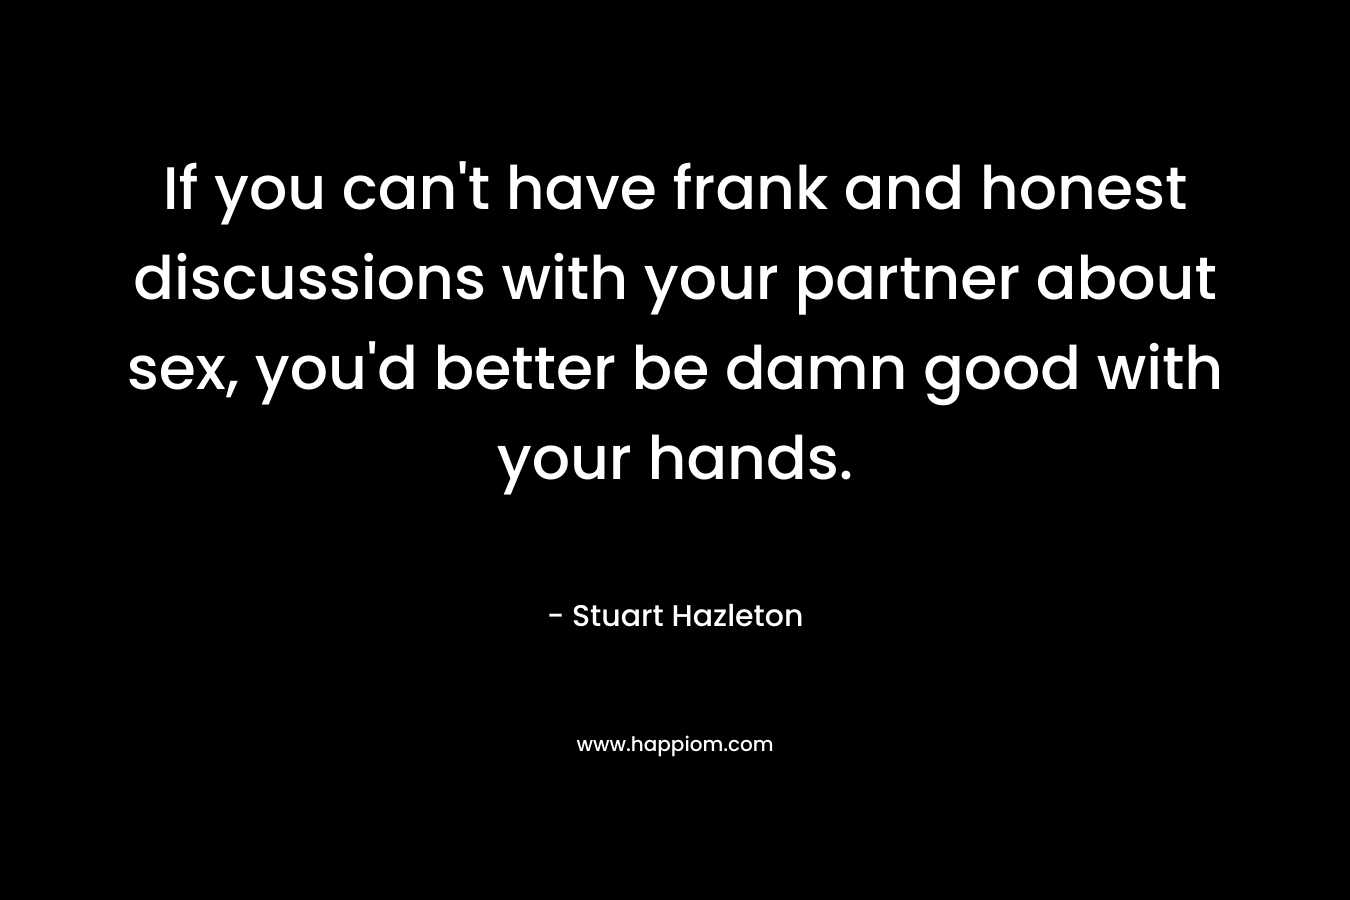 If you can’t have frank and honest discussions with your partner about sex, you’d better be damn good with your hands. – Stuart Hazleton